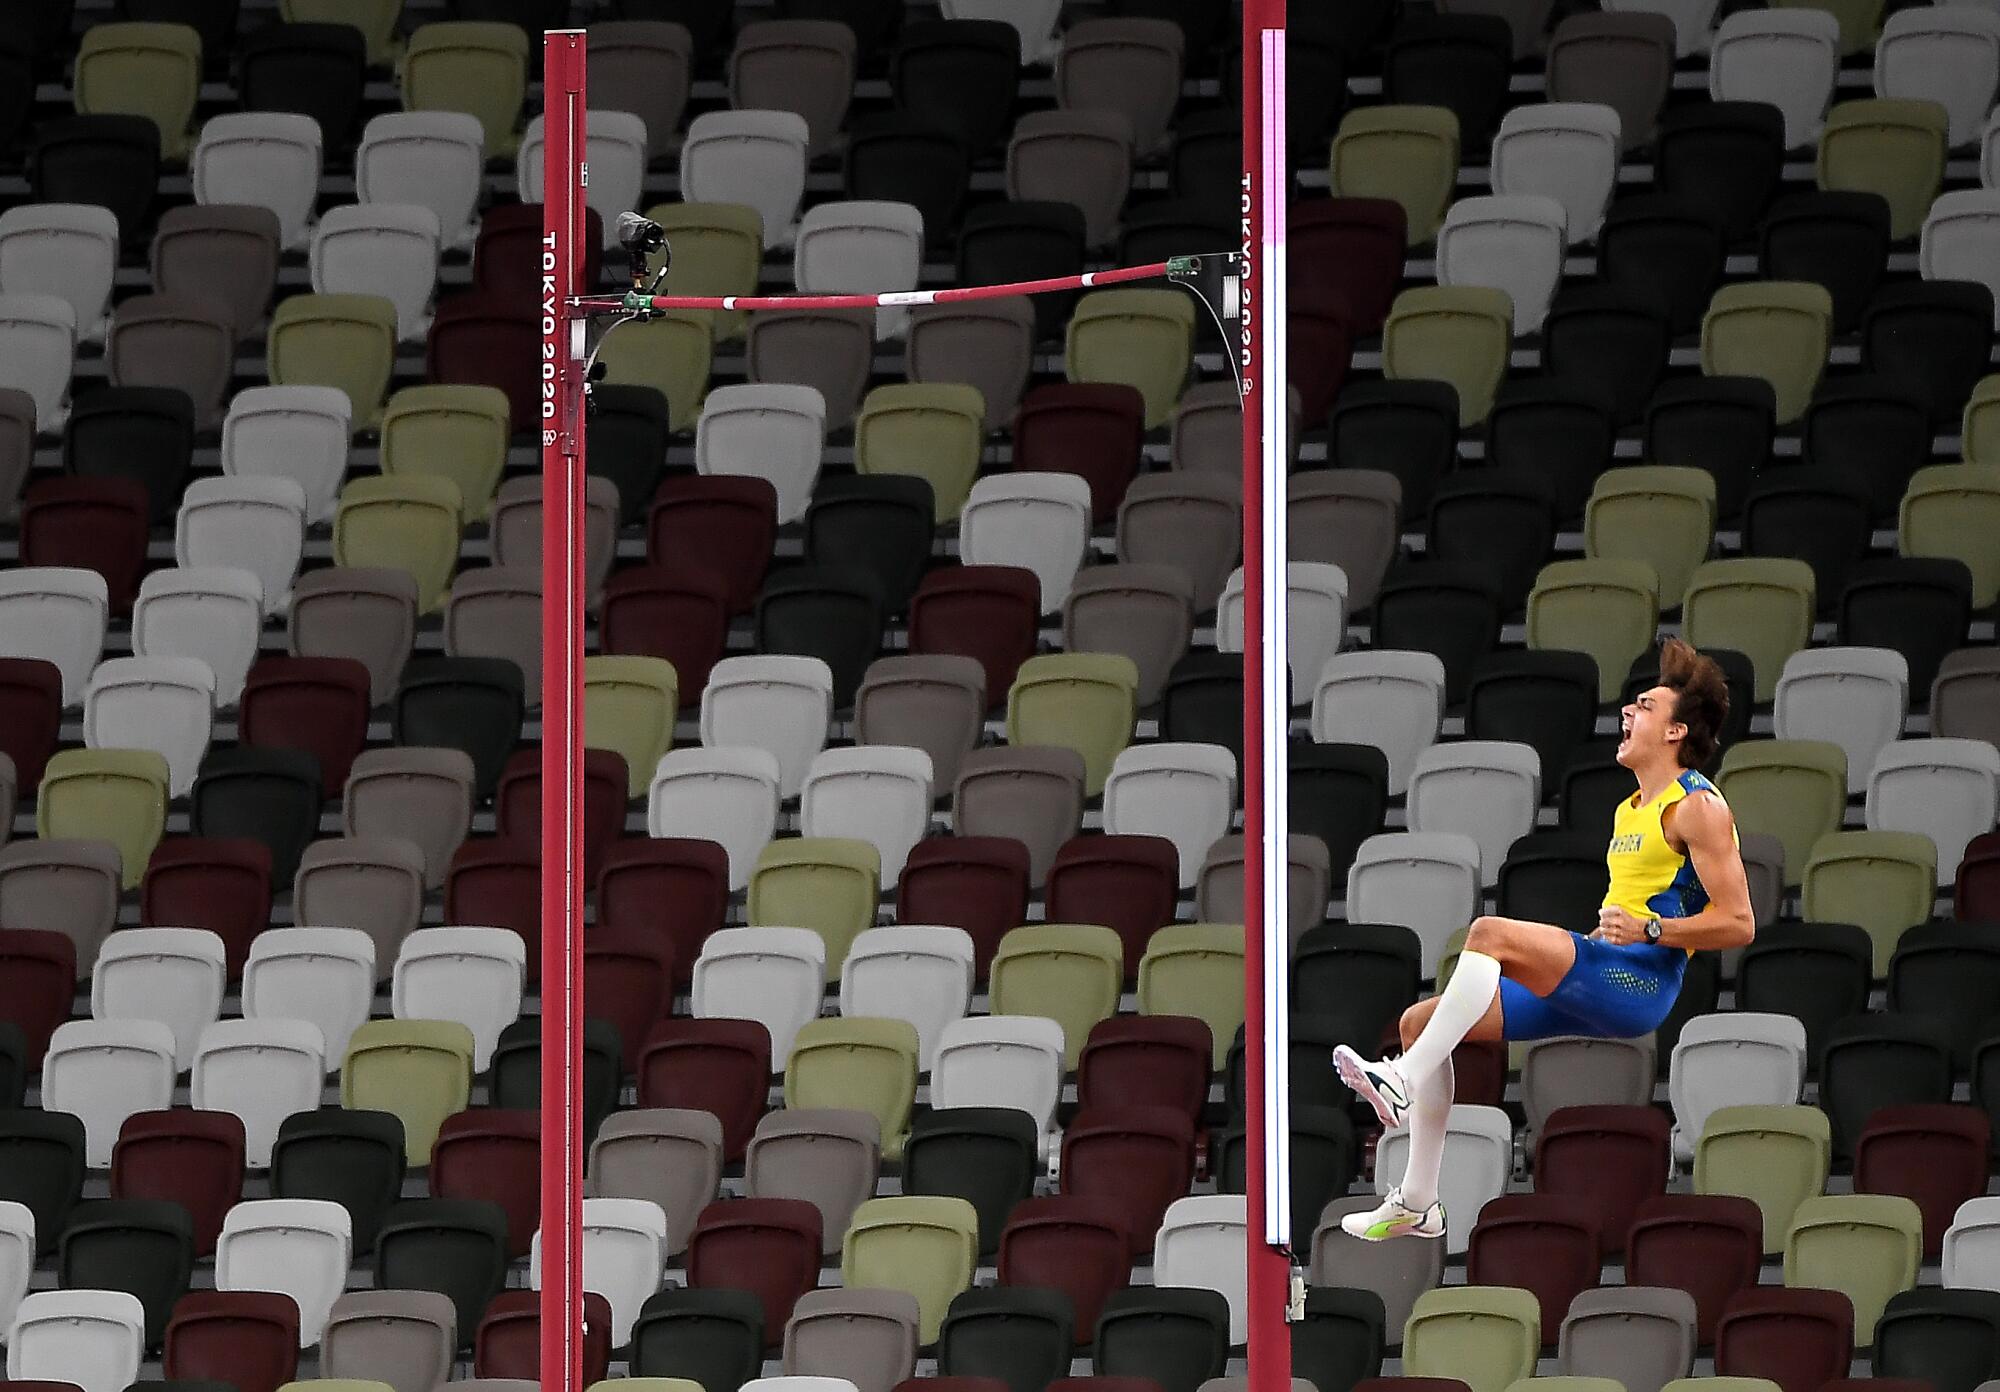 Sweden's Armand Duplantis celebrates after clearing the bar to win the gold medal in the pole vault